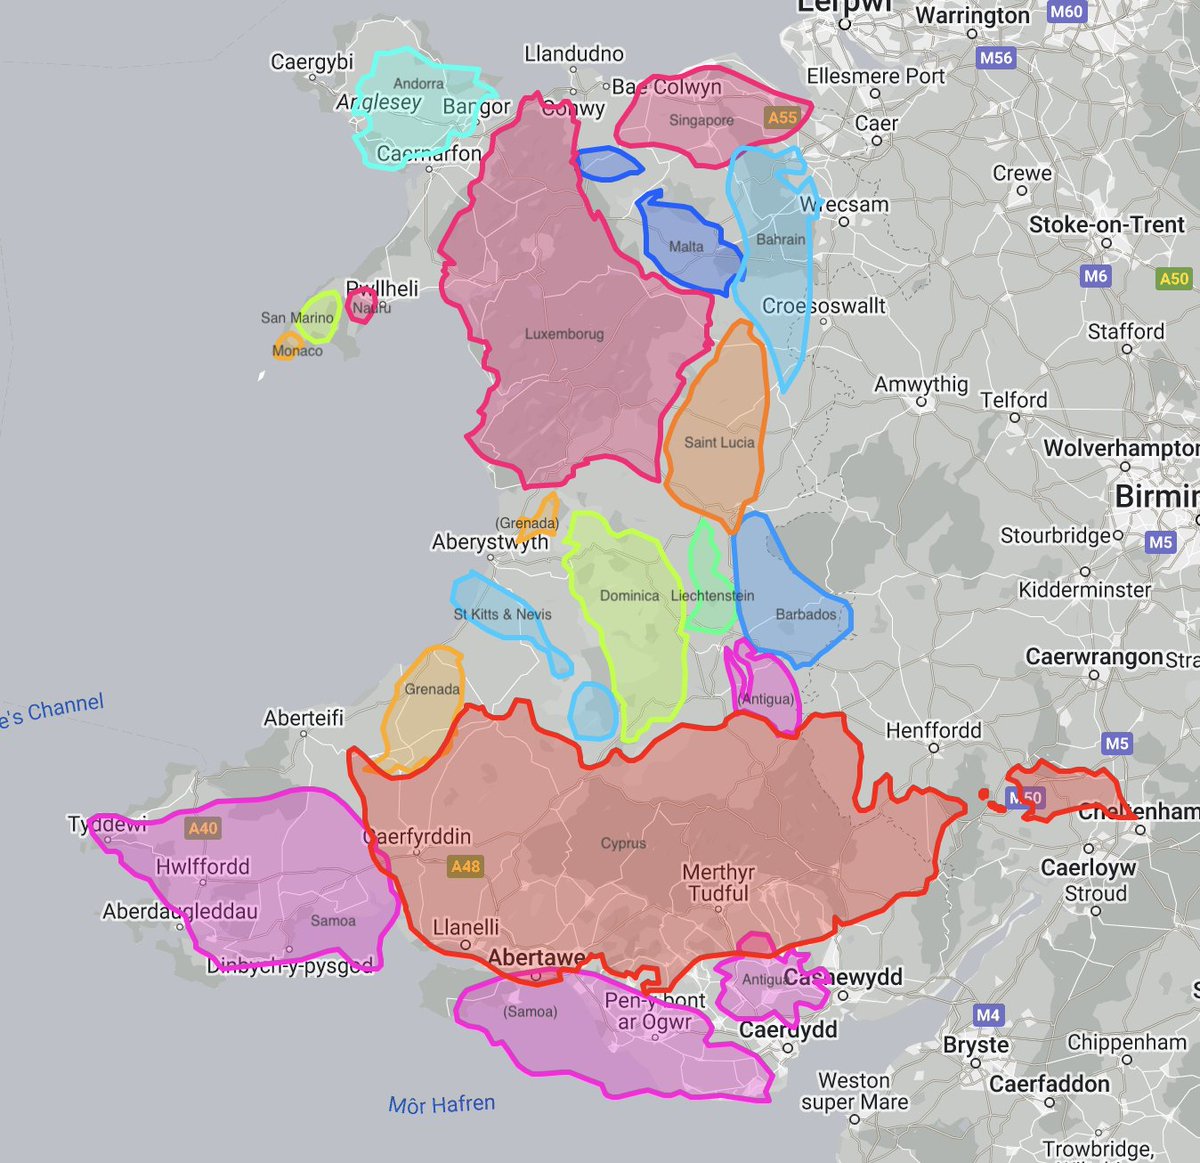 Amazing how many independent sovereign state countries you can fit inside Wales.